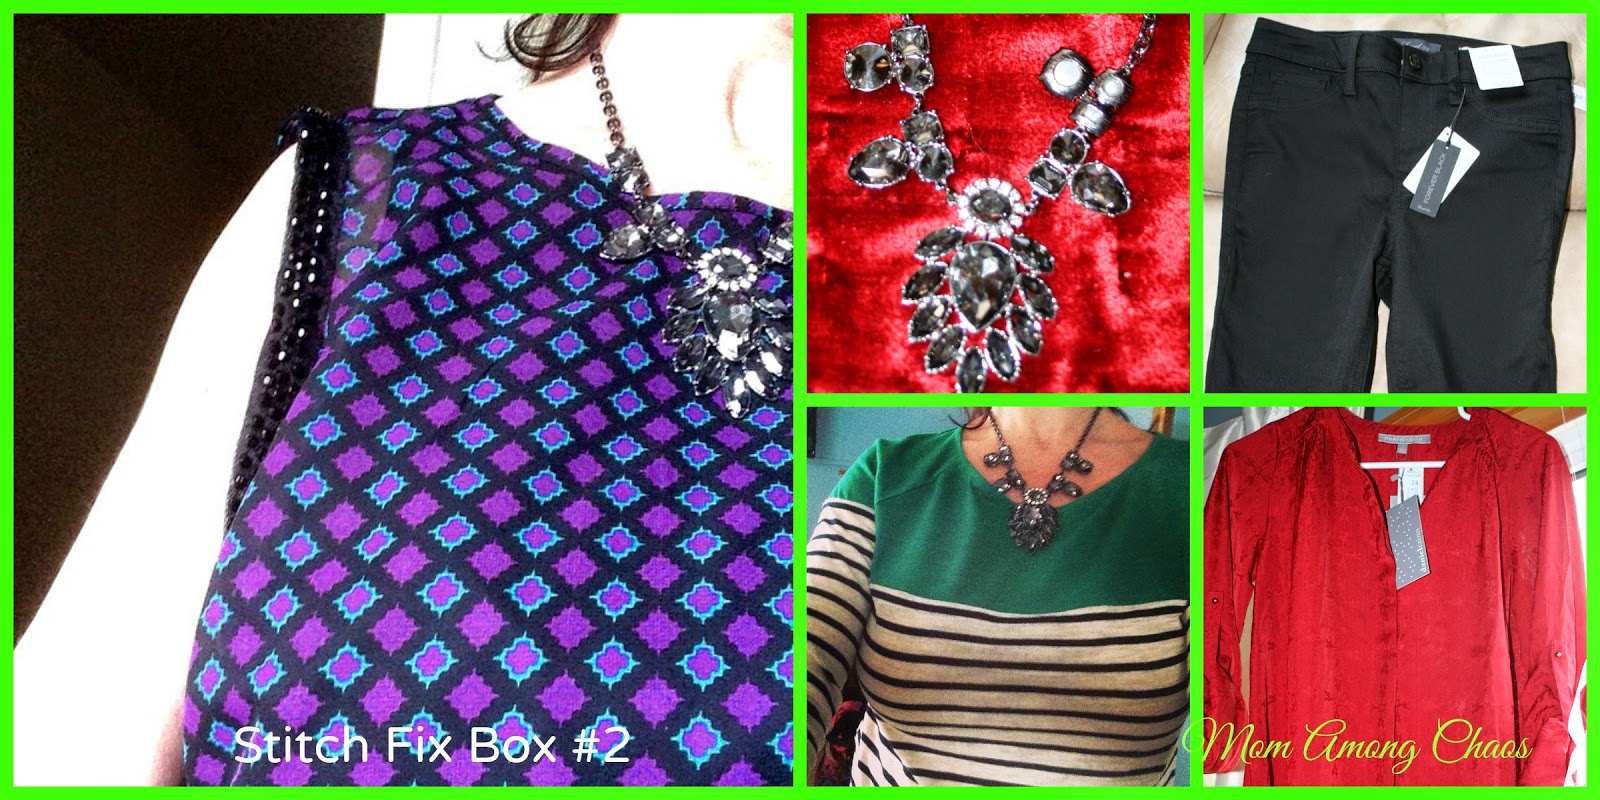 Mom Among Chaos: Stitch Fix Box 2: Getting Styled for the Holidays